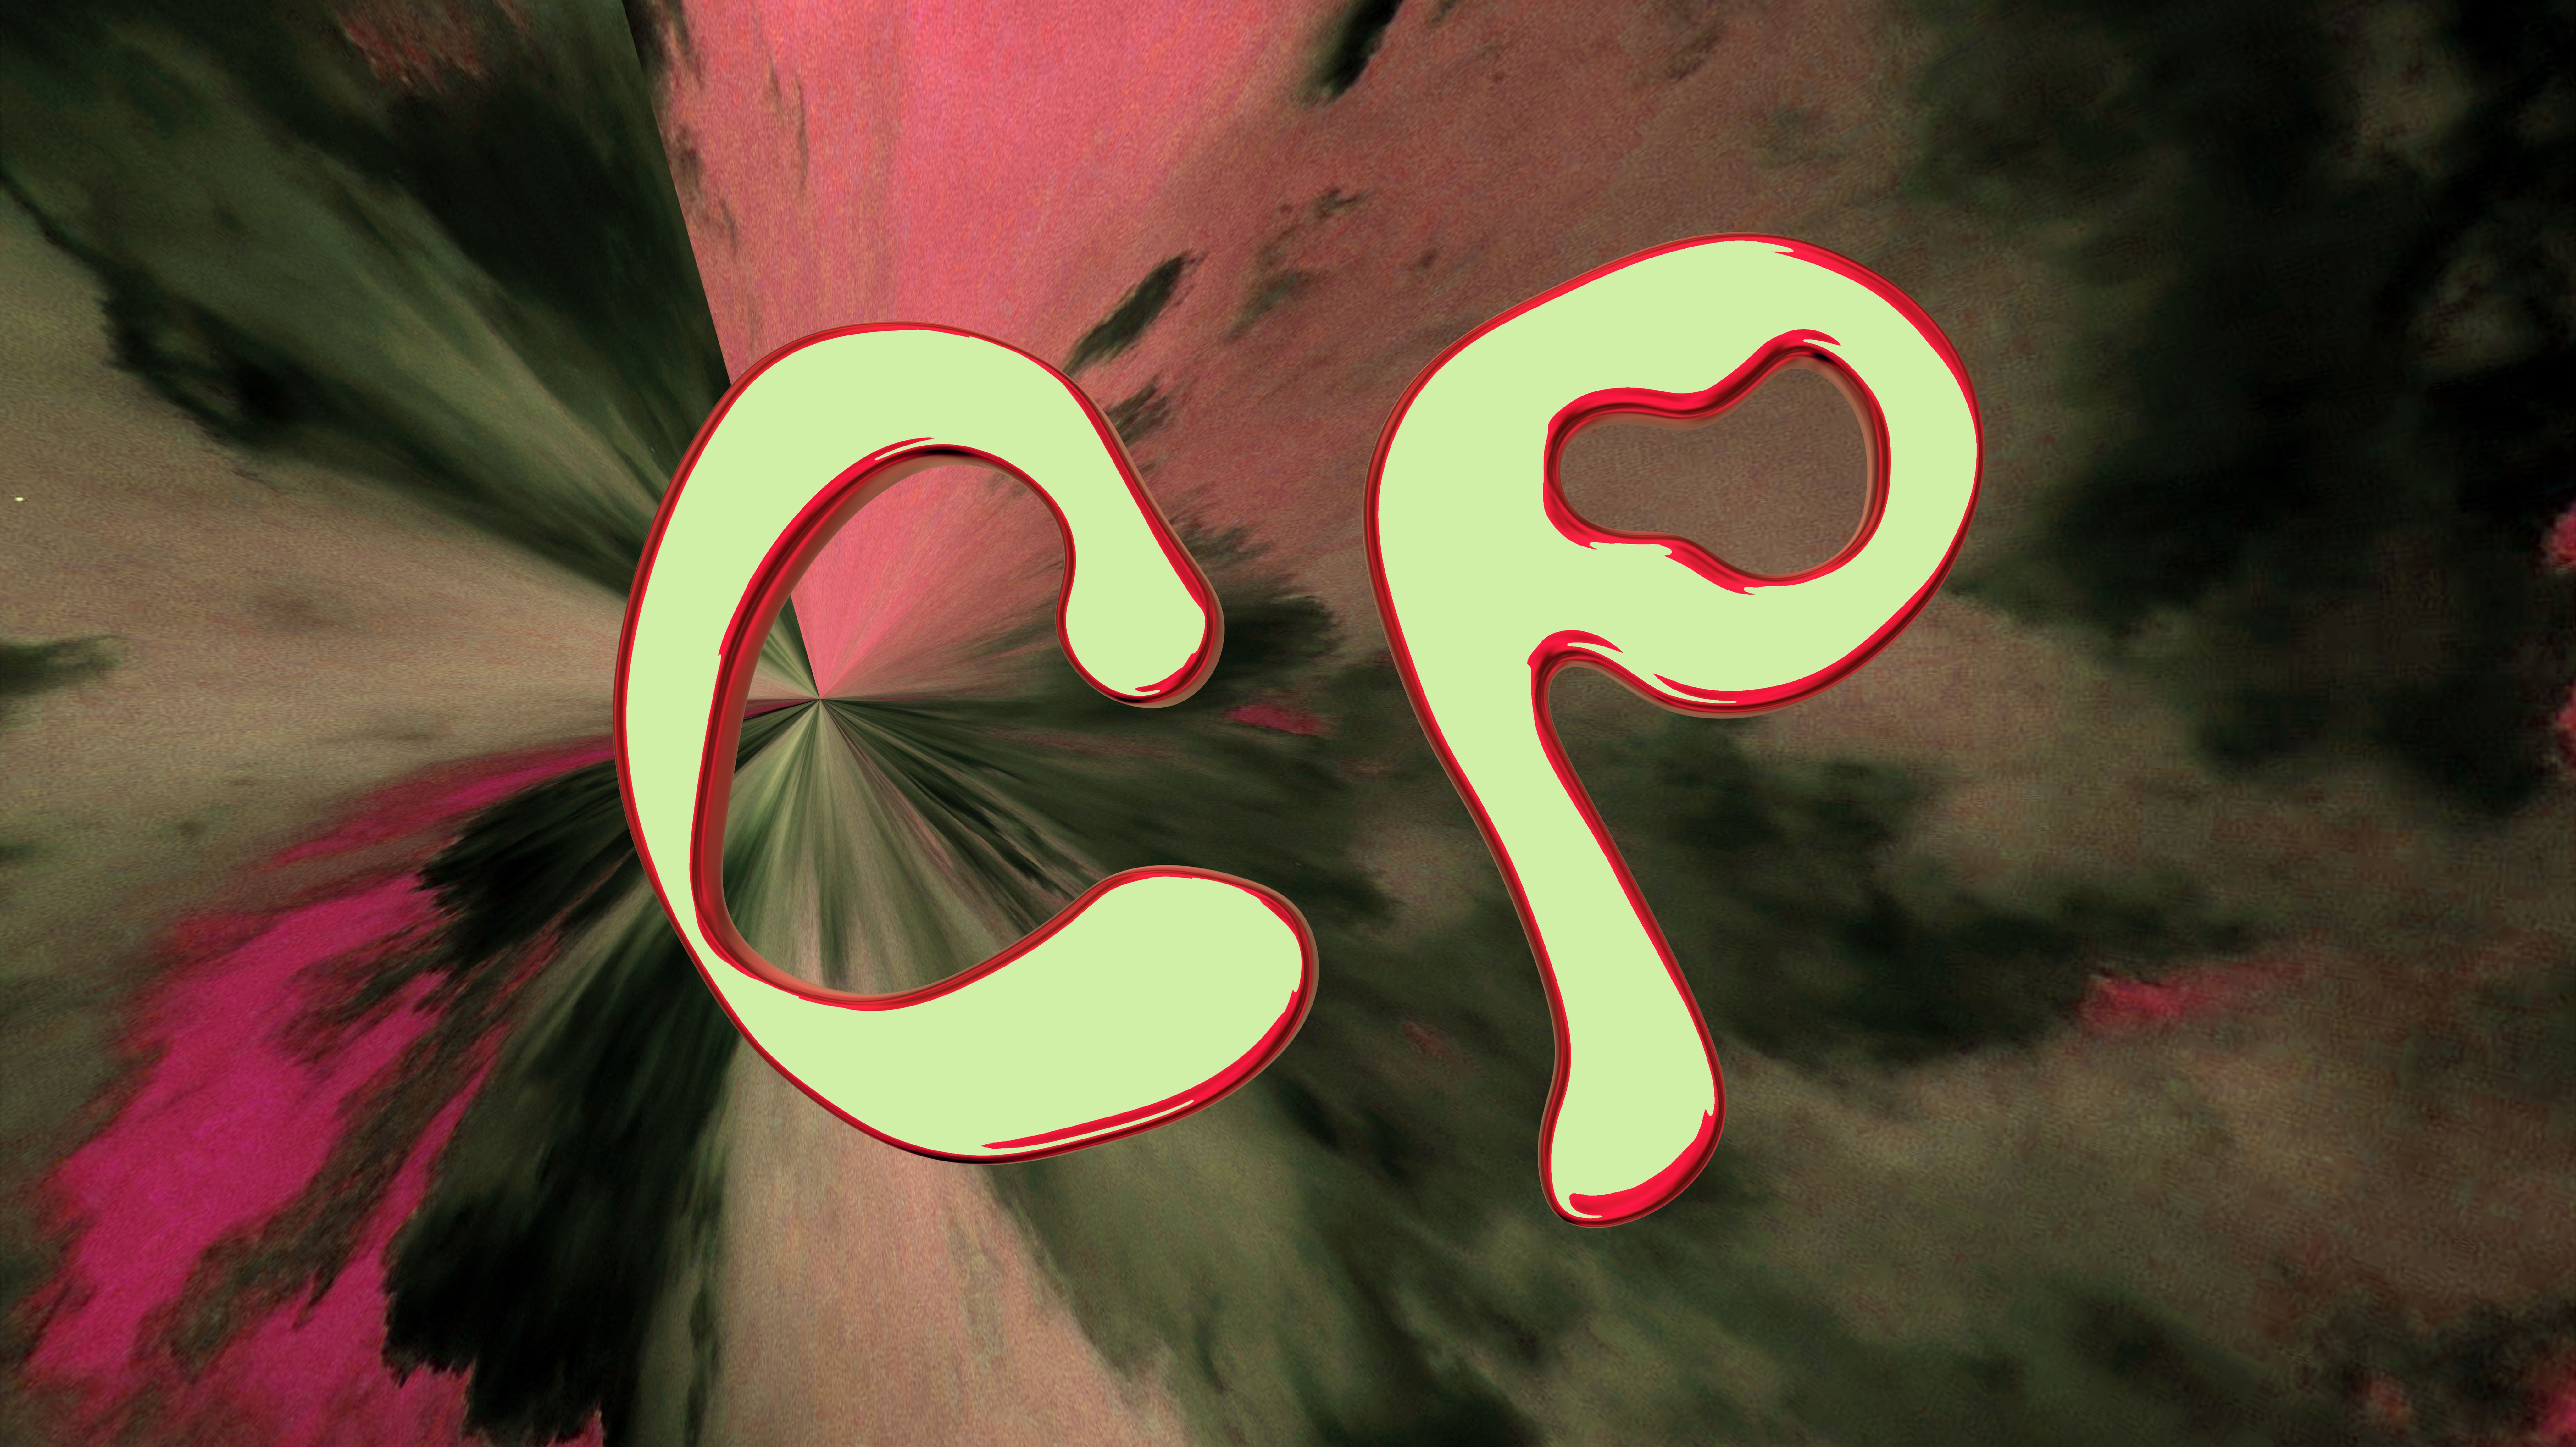 The letters C and P in yellow outlined in red, on a swirly pink and brown background